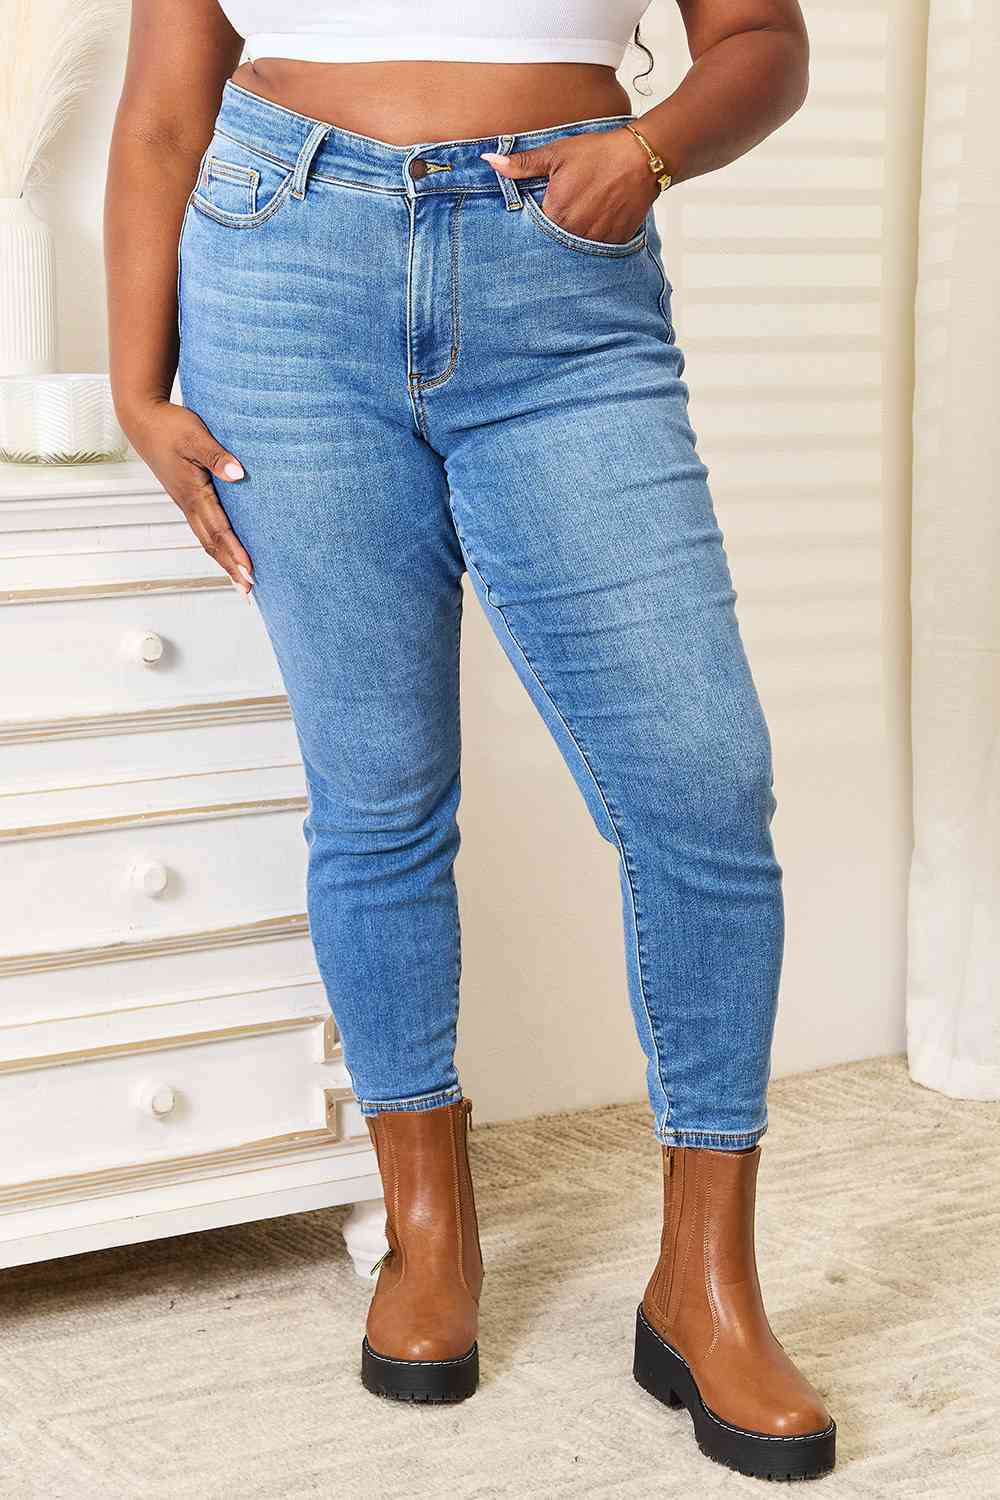 Plus Size, Judy Blue High Waist Classic Thermal Skinny style 82349